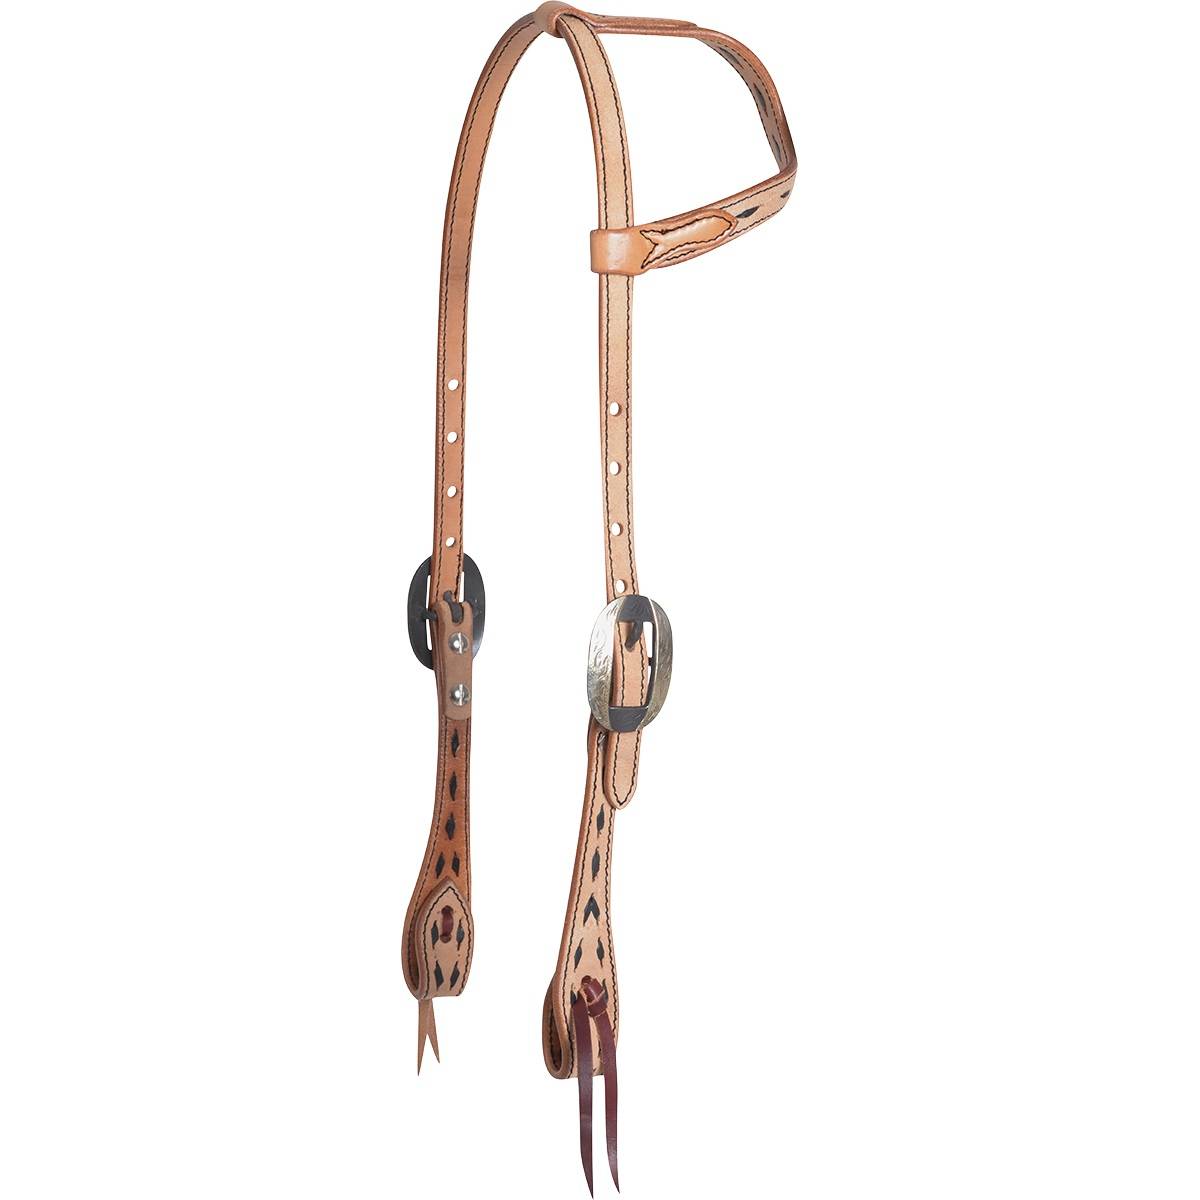 Details about   CASHEL SLIP EAR GUNS AND ROSES WESTERN HEADSTALL 